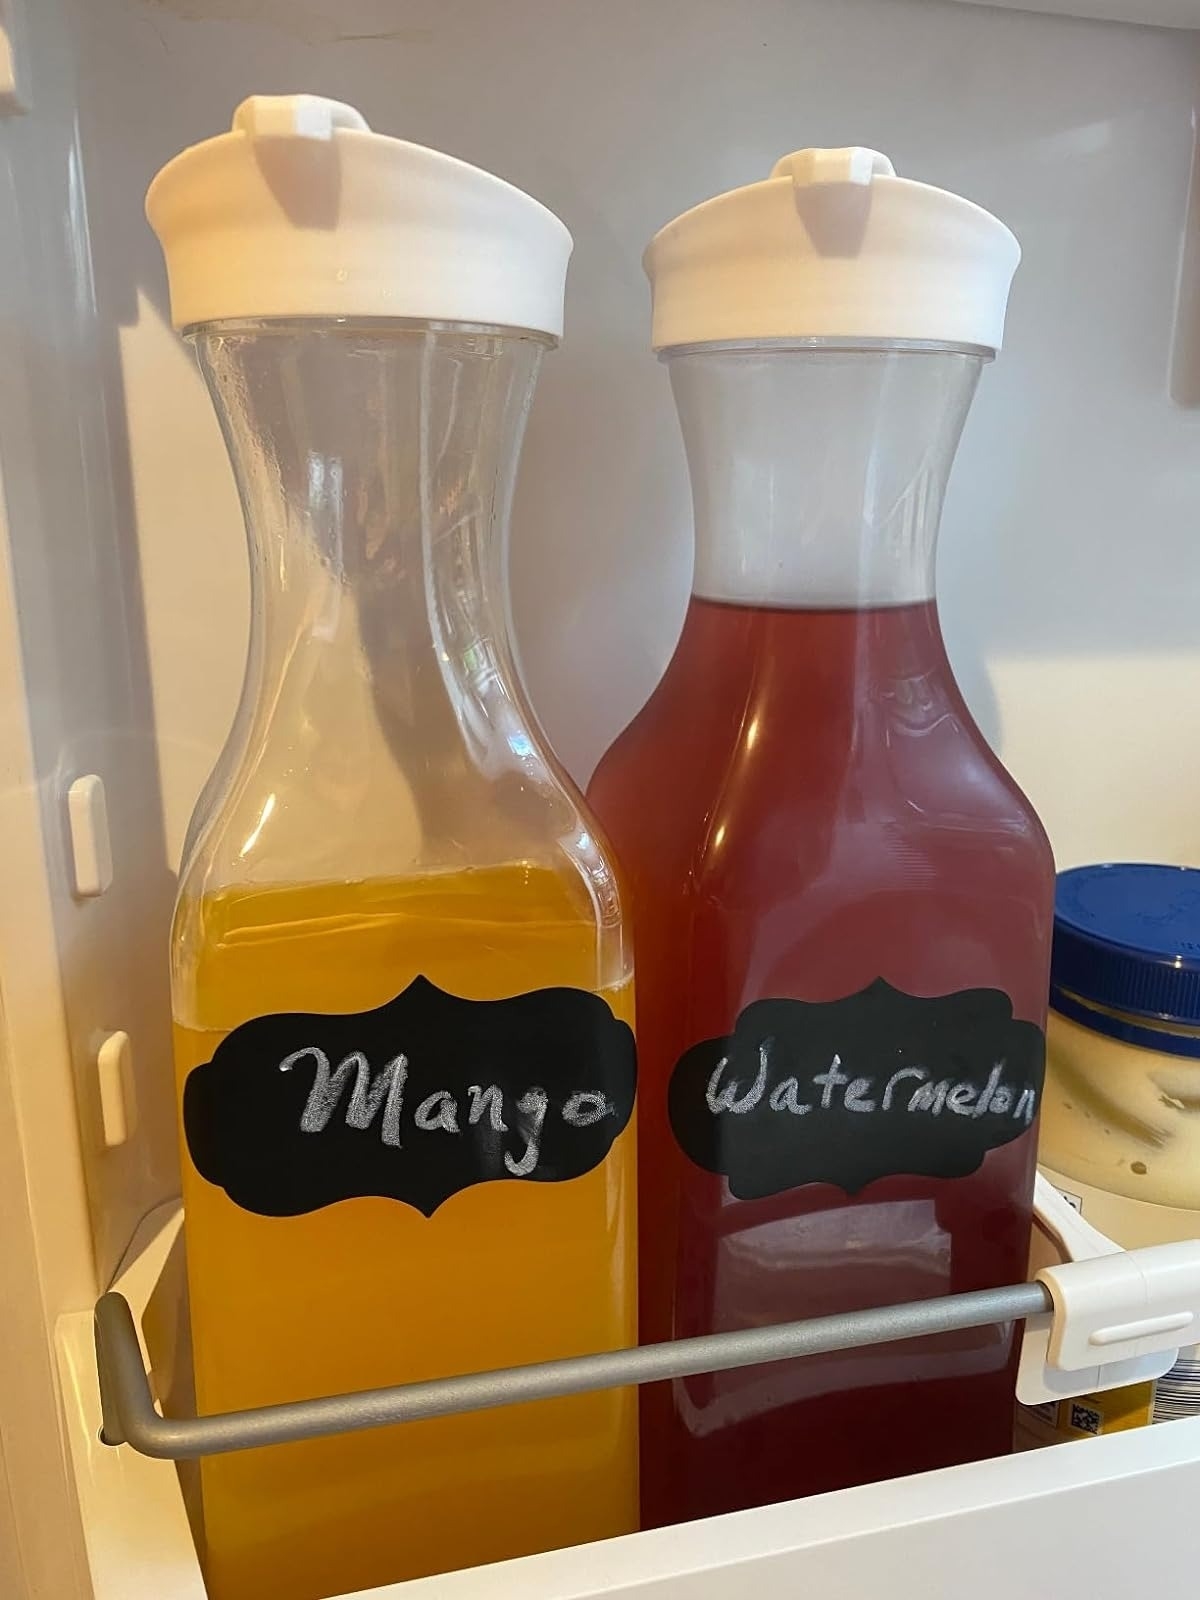 Two labeled carafes with drinks, one marked &#x27;Mango&#x27; and the other &#x27;Watermelon&#x27;, inside a fridge